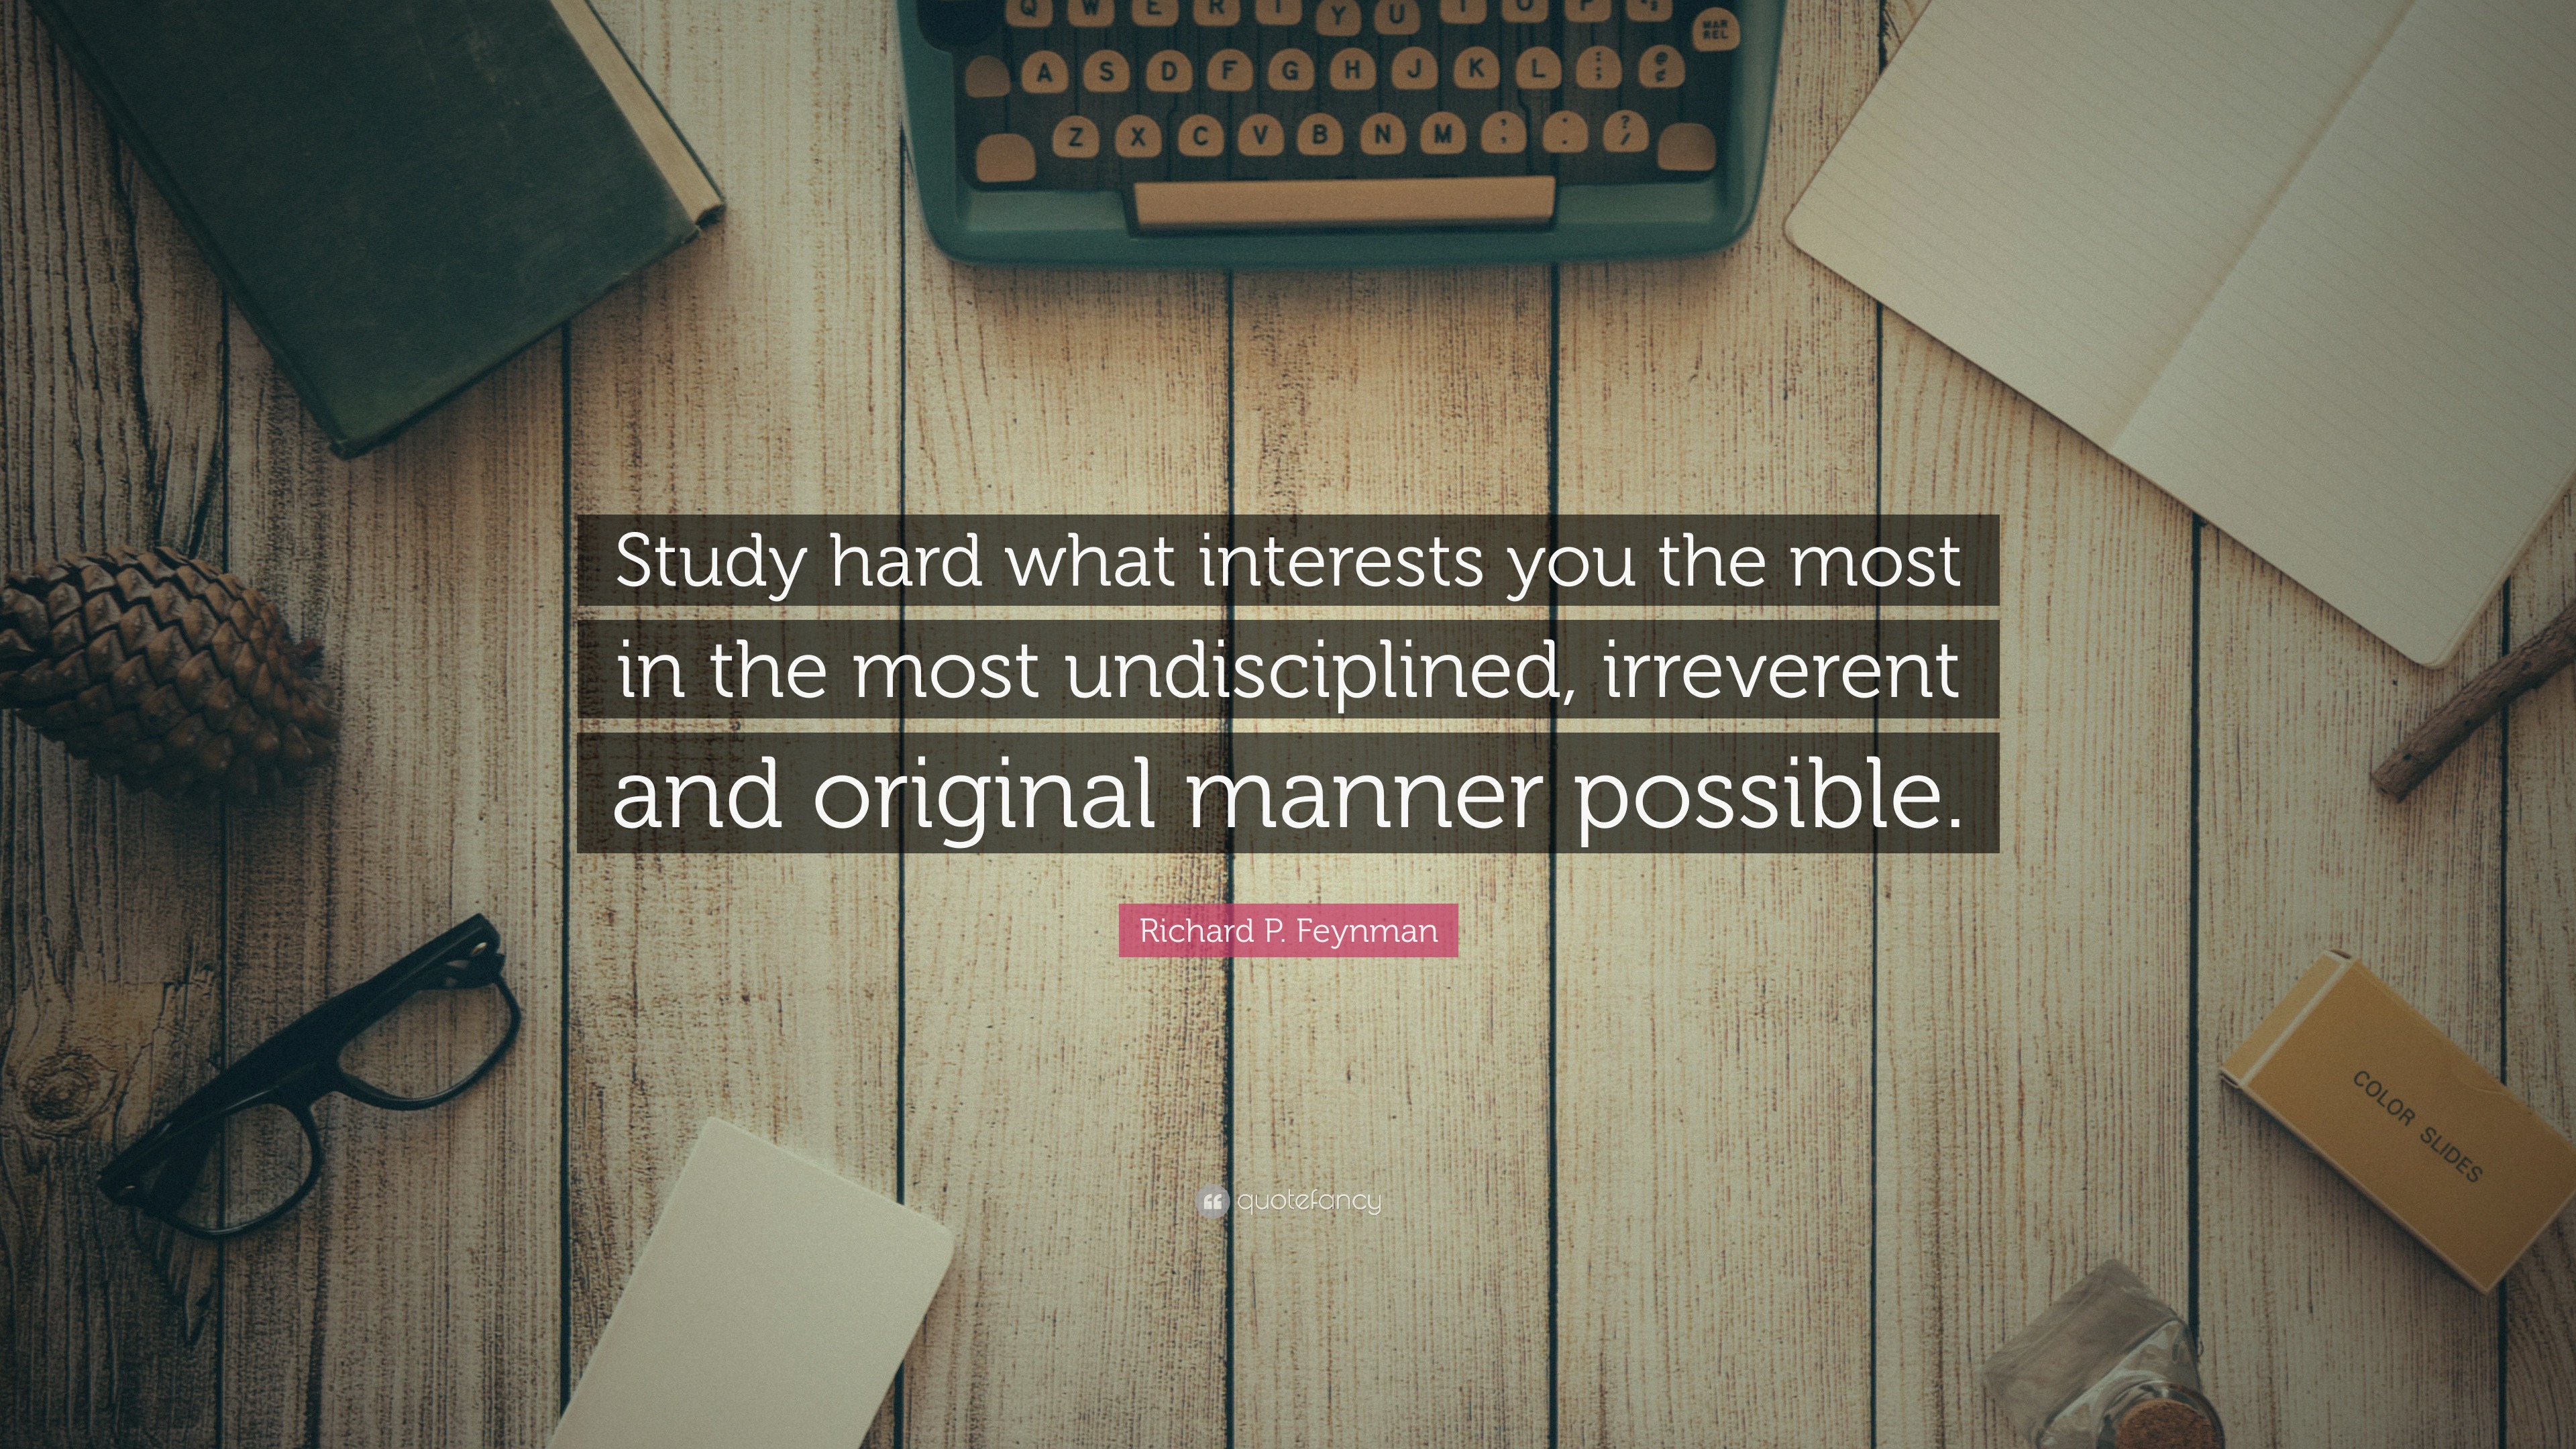 Richard P. Feynman Quote: “Study hard what interests you the most in the  most undisciplined, irreverent